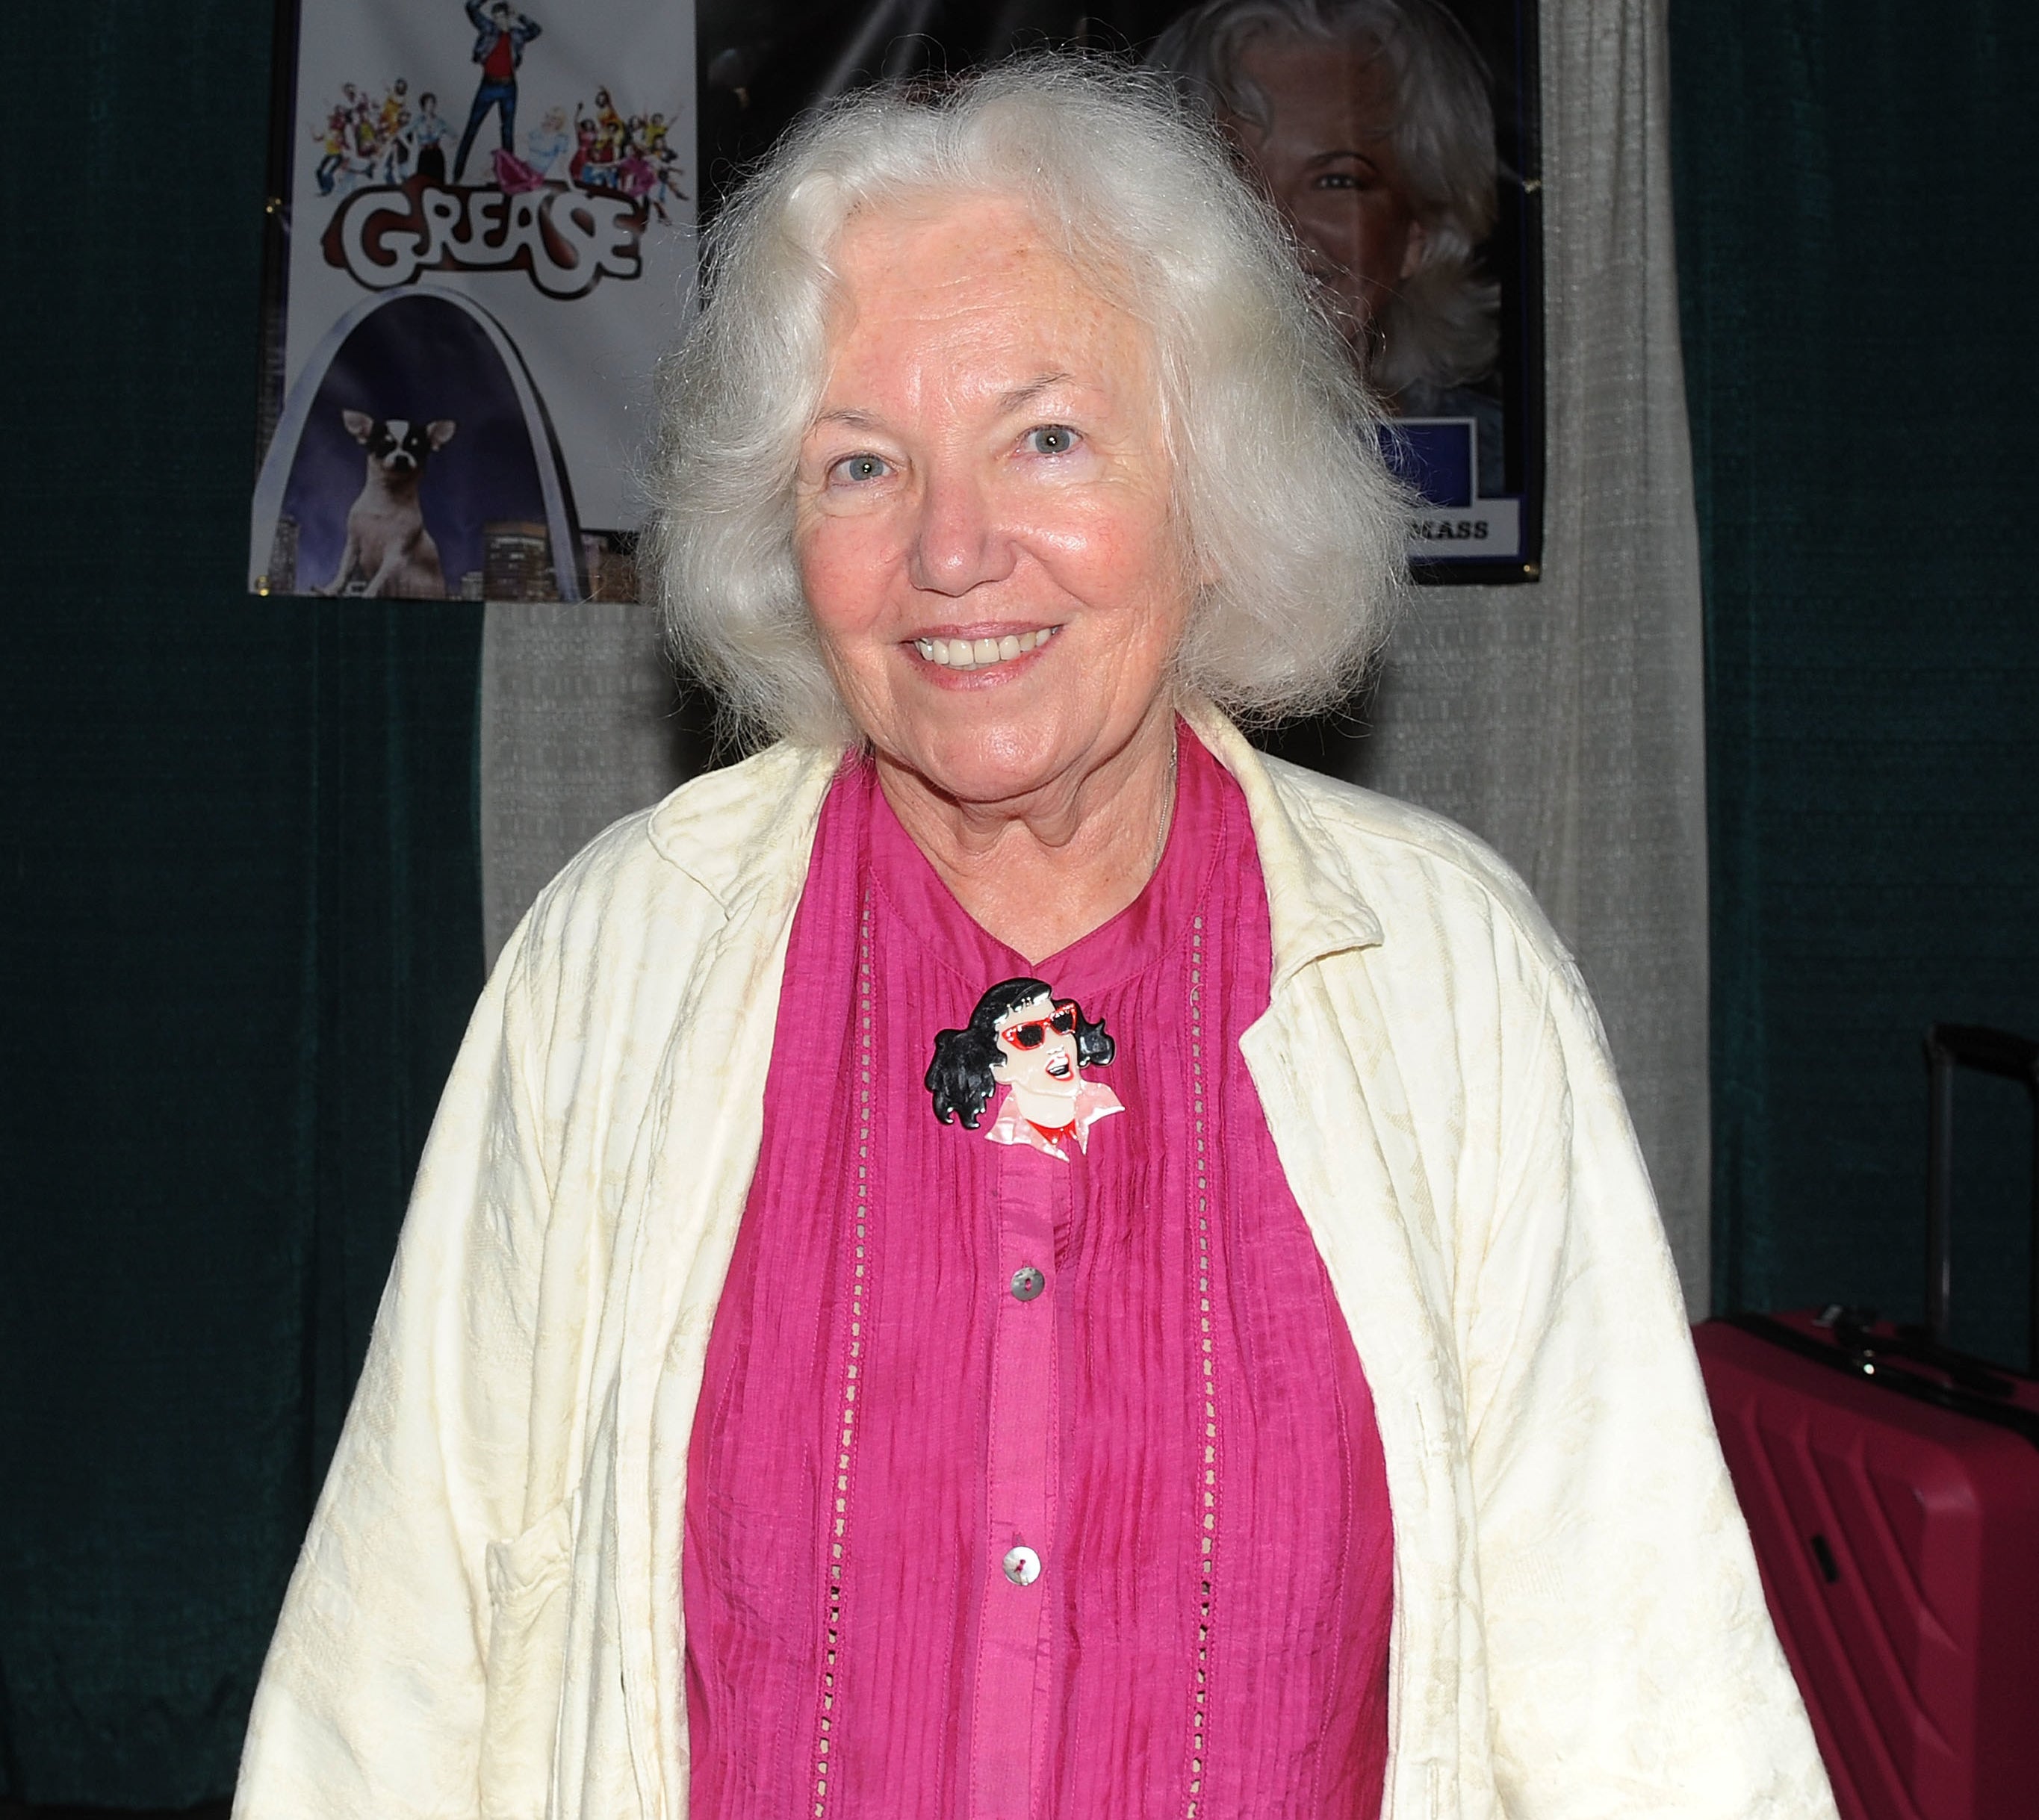 Jamie Donnelly at the 2018 STL Pop Culture Con